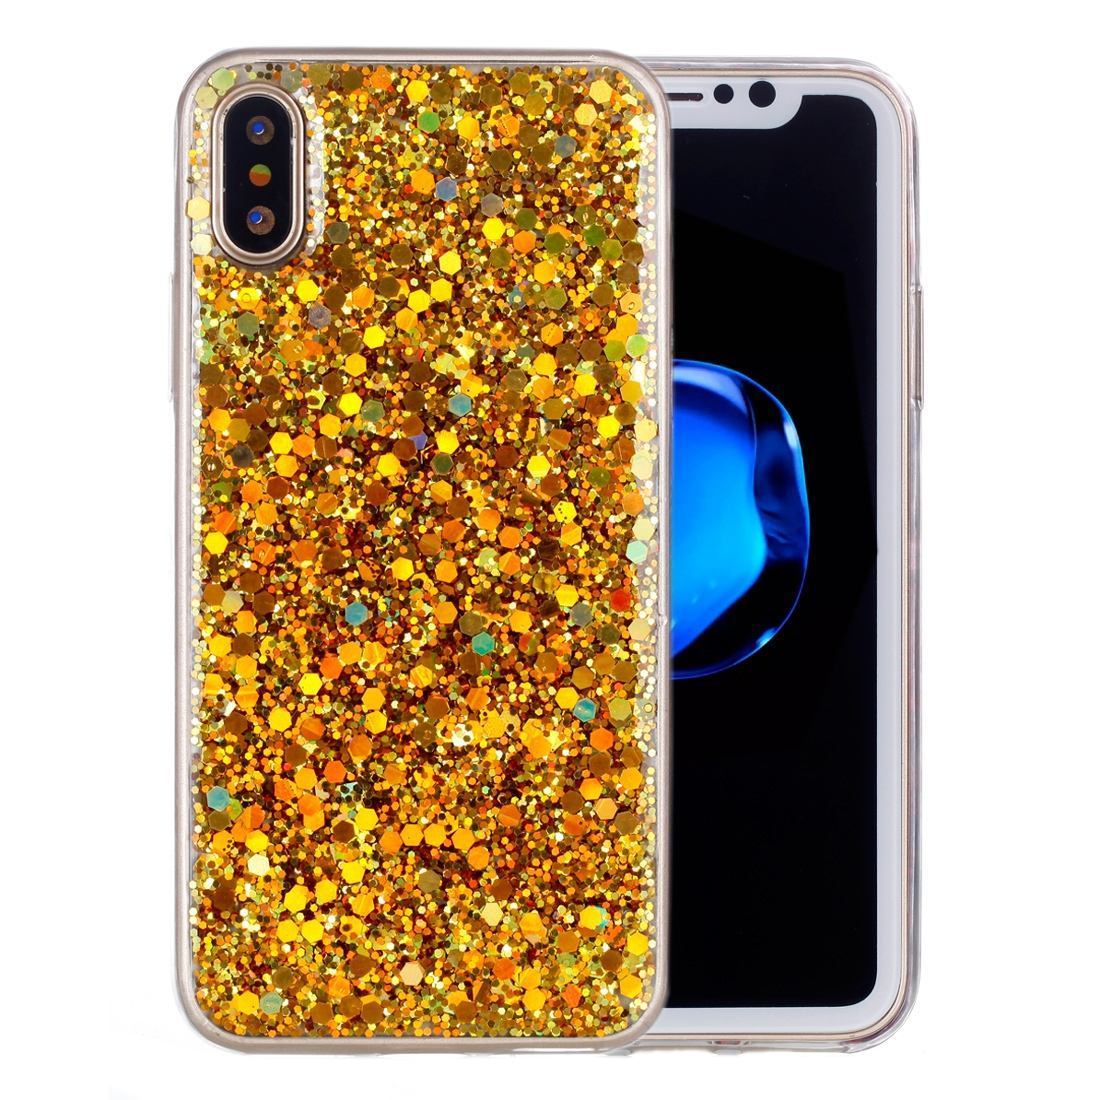 For iPhone XS,X Case,Elegant Colorful Glitter Powder Style Protective Cover,Gold